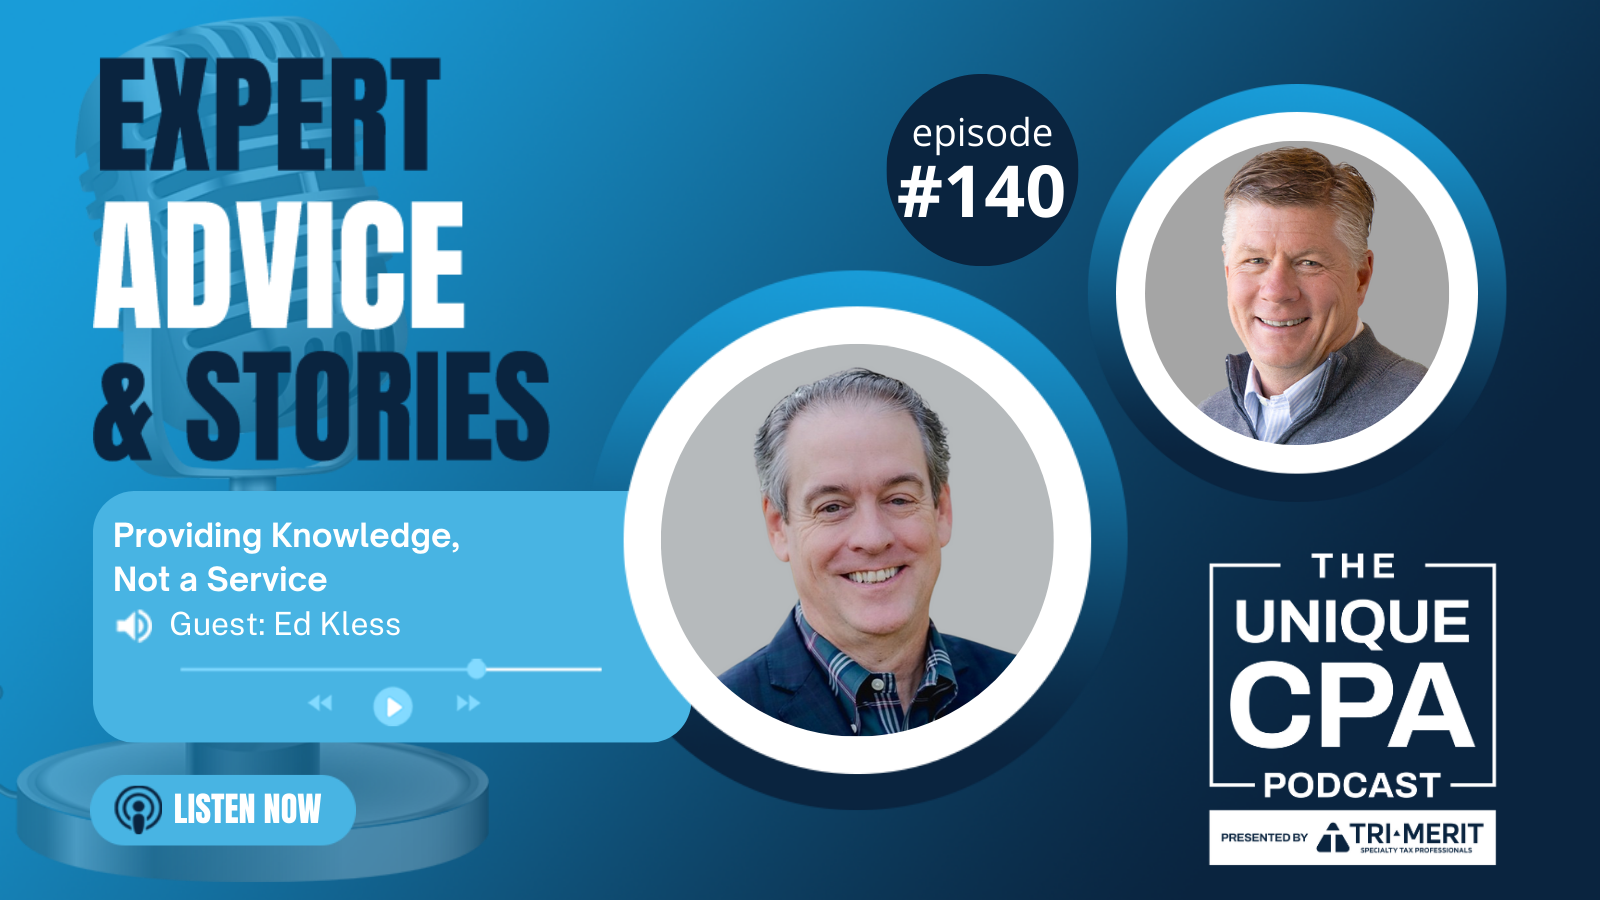 Unique Cpa Featured Image Ep 140 Ed Kless - Providing Knowledge, Not A Service - Tri-Merit